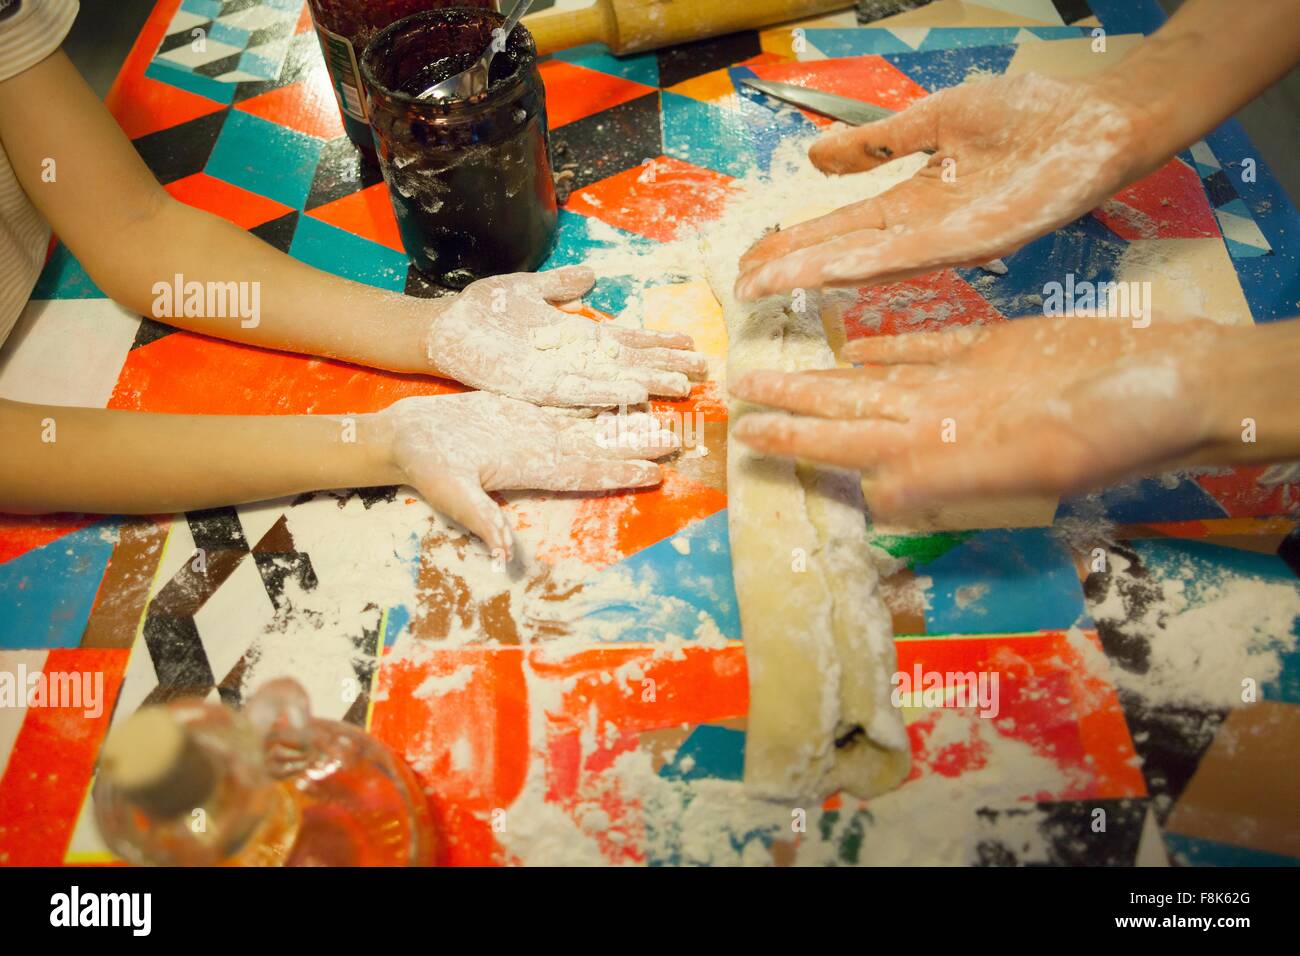 Woman and son comparing messy floured hands at kitchen table Stock Photo